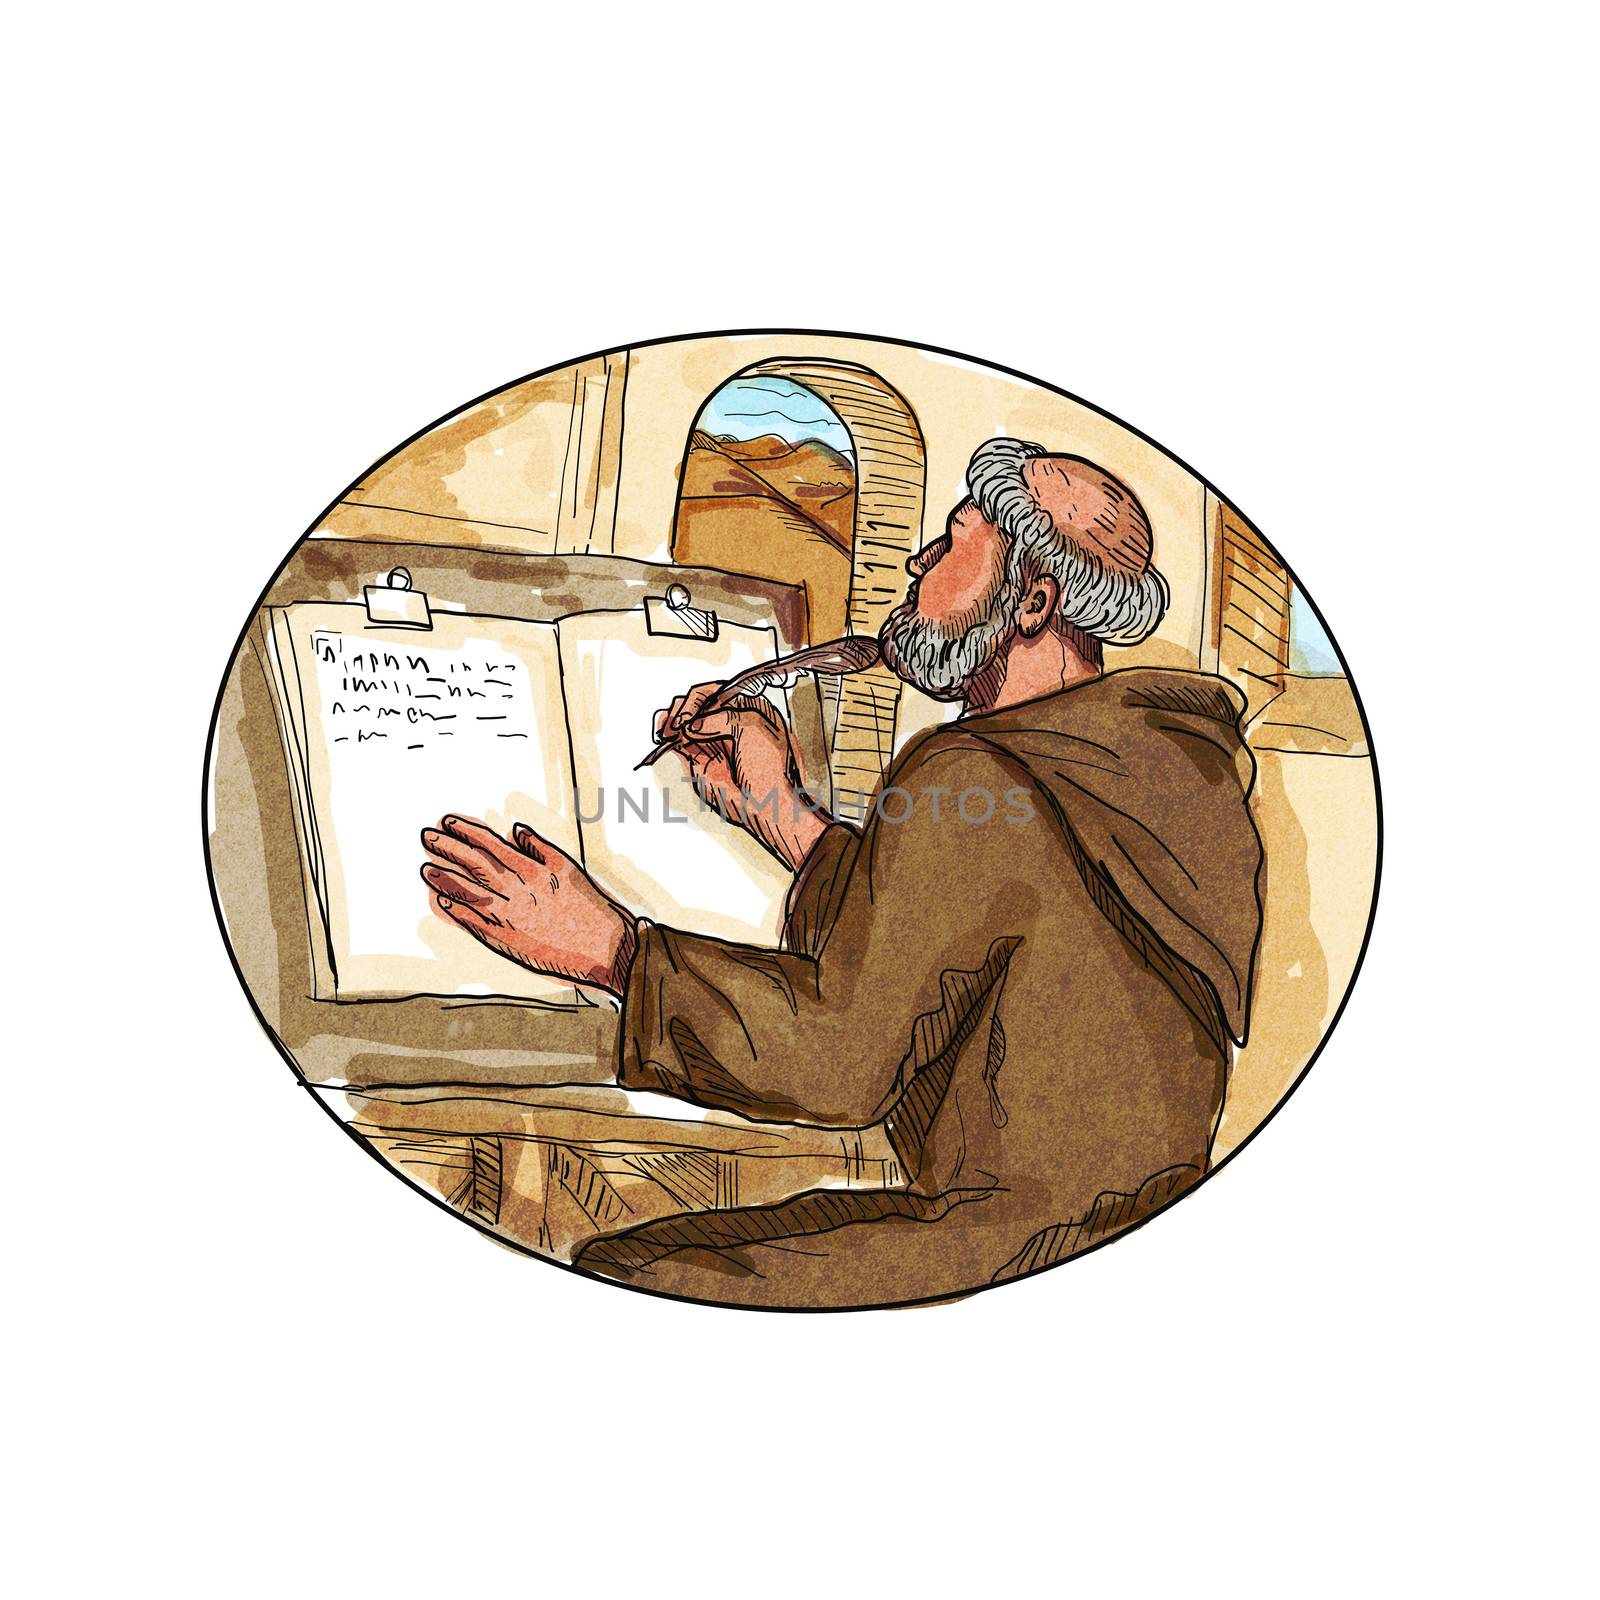 Retro style drawing illustration of a Medieval monk or friar in a monastery writing or transcribing a book set inside oval on isolated background.